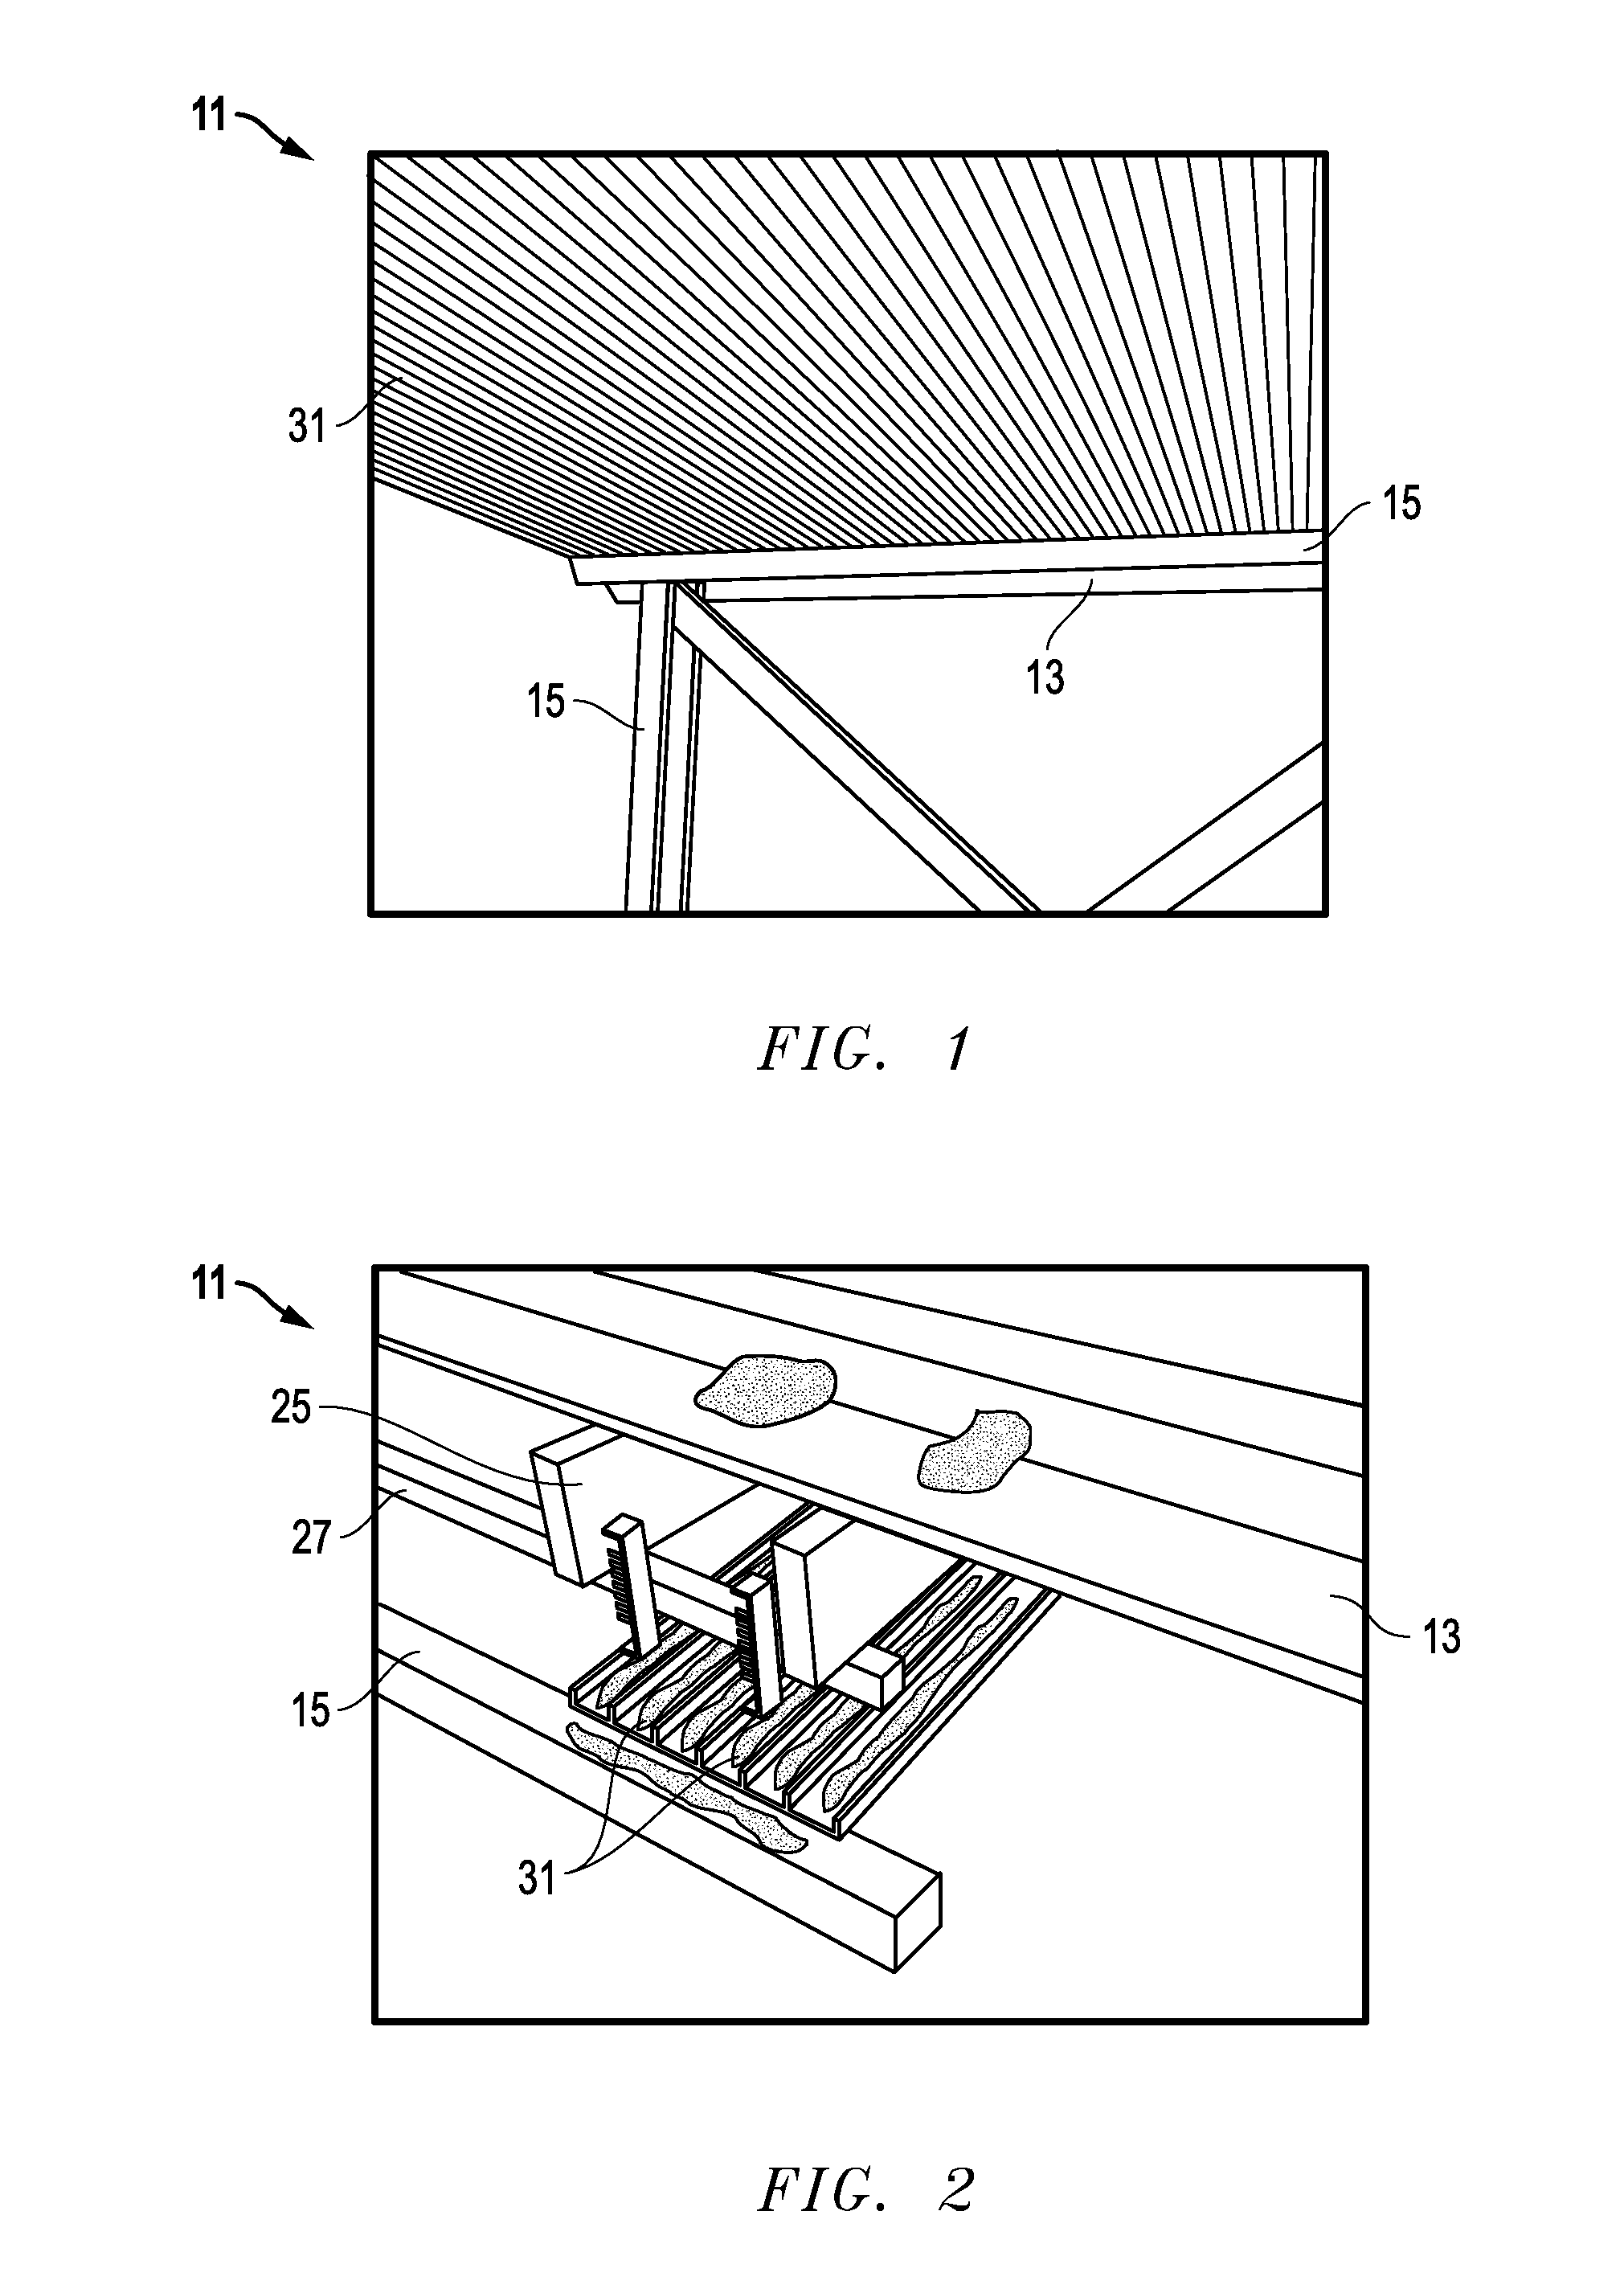 System, method and apparatus for under deck drainage